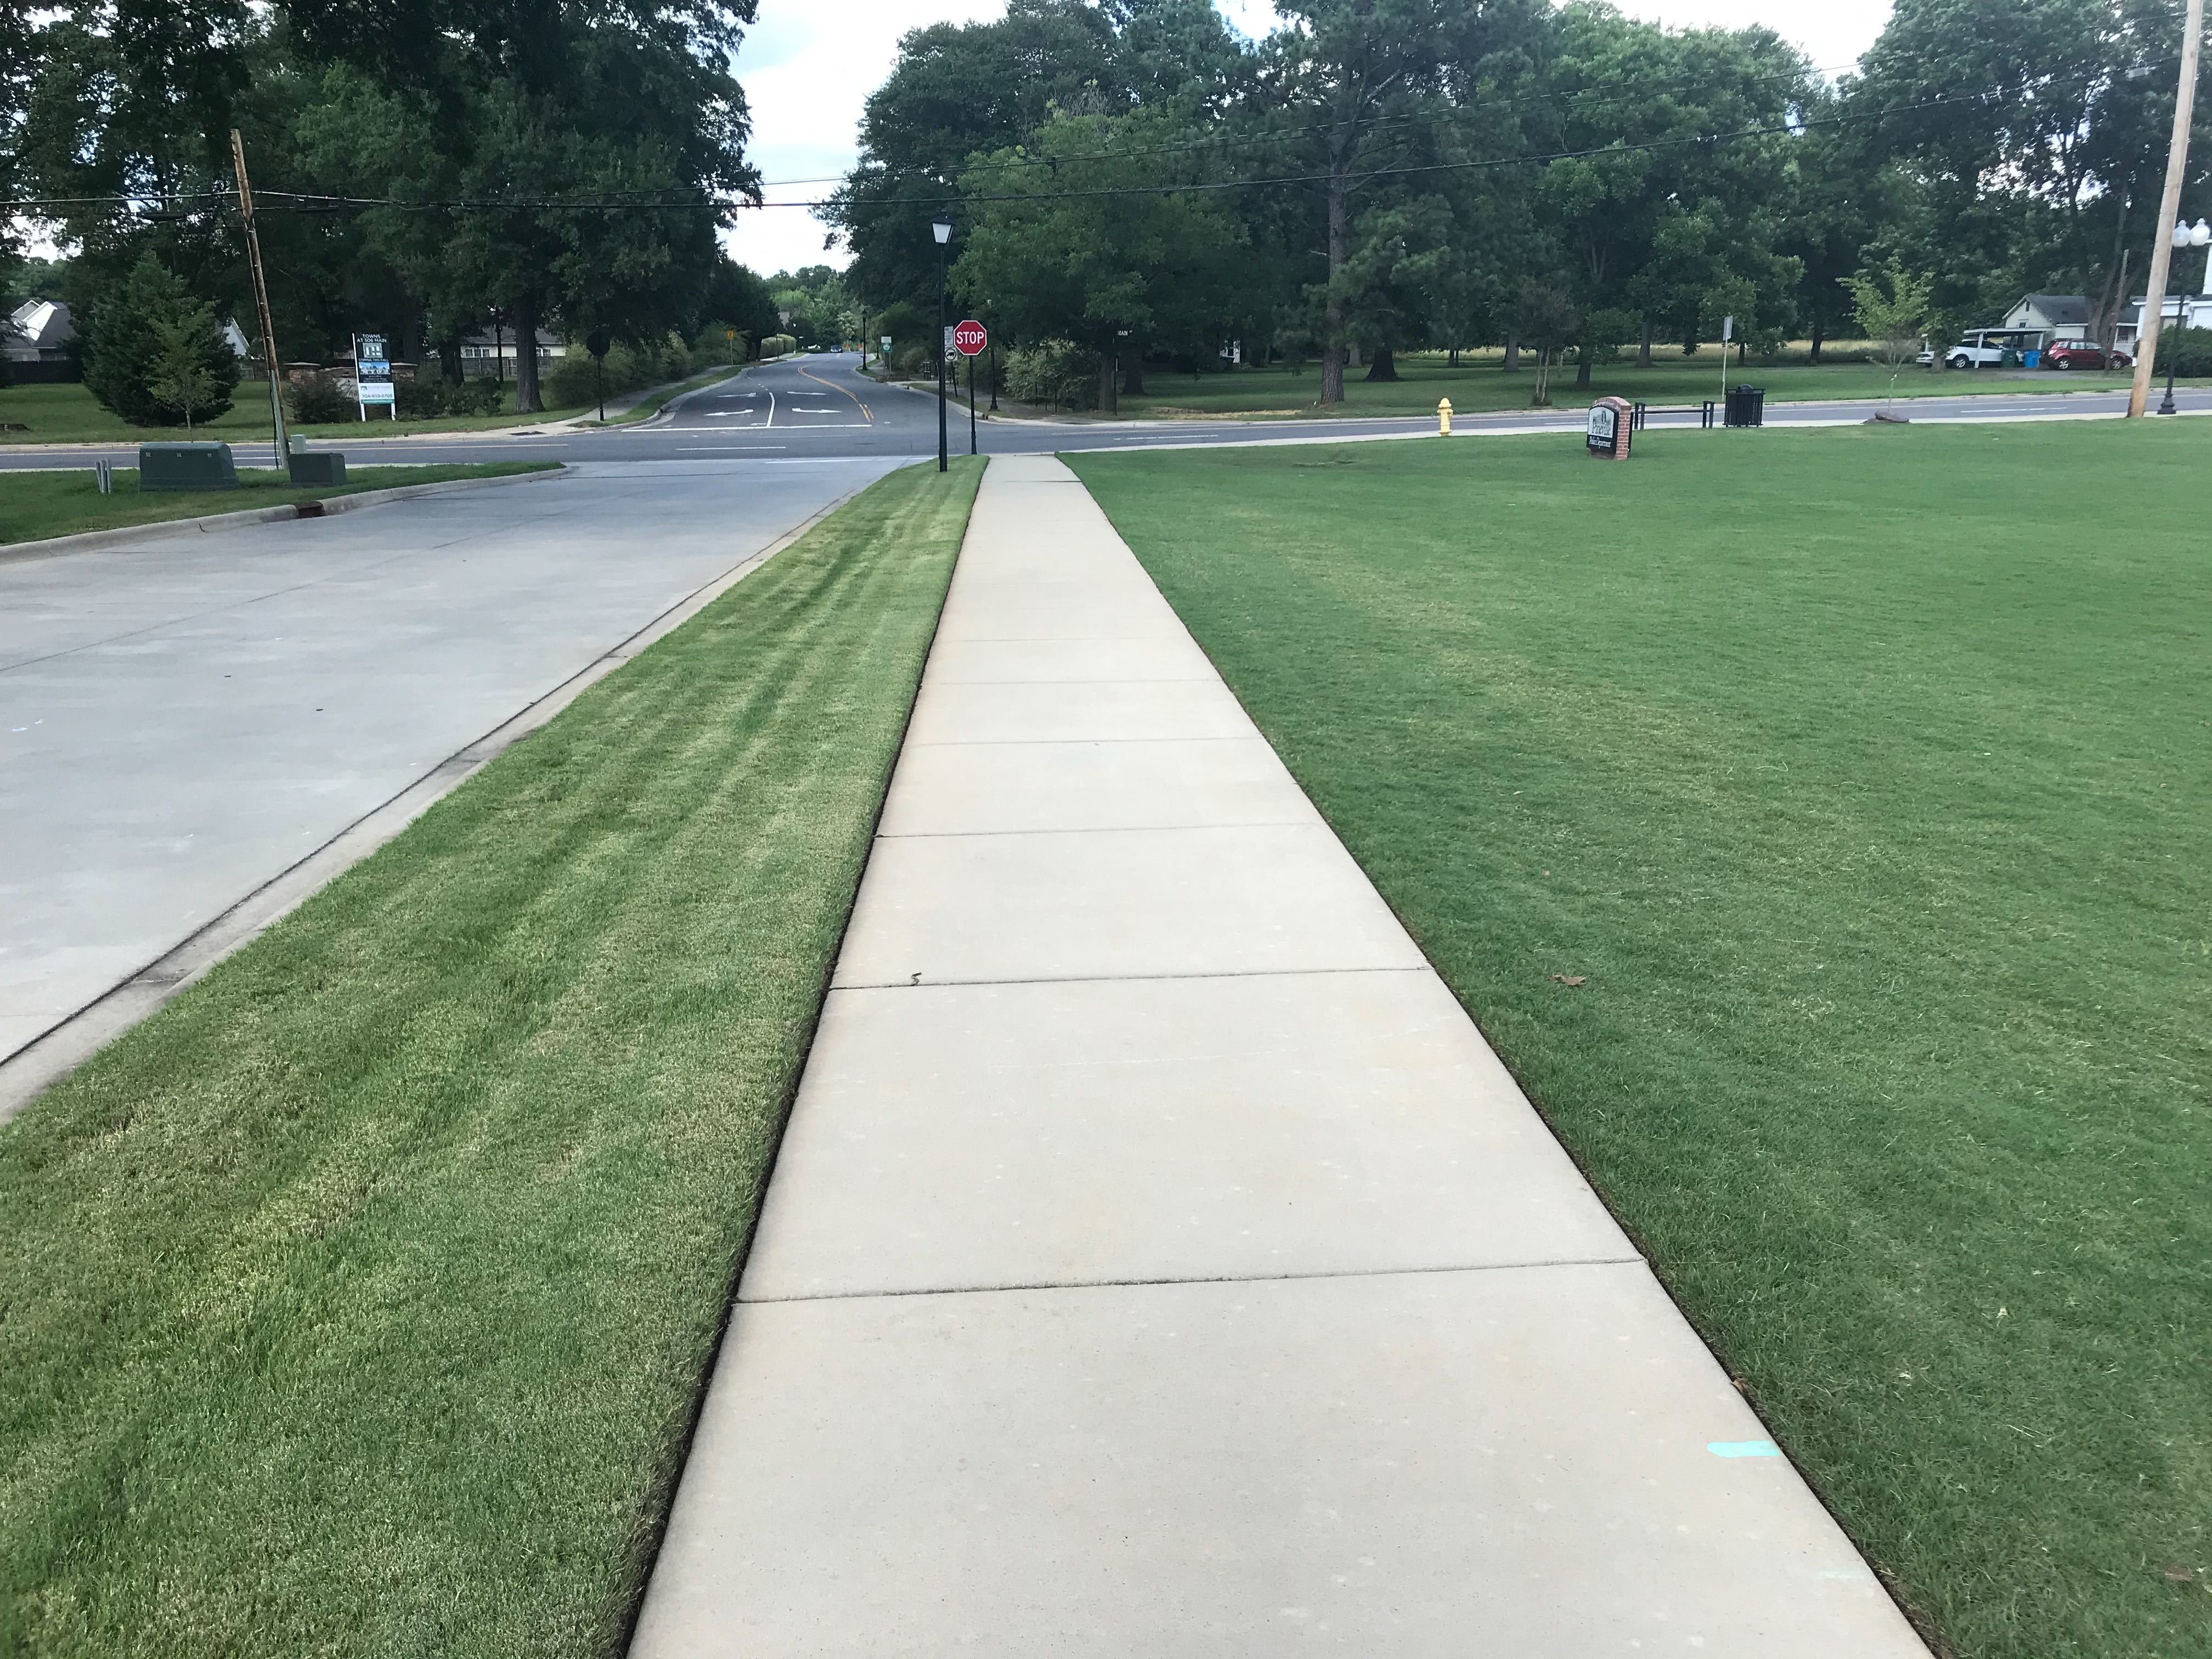 beauty strip mowed by traditional mower compared with lawn maintained by Automower